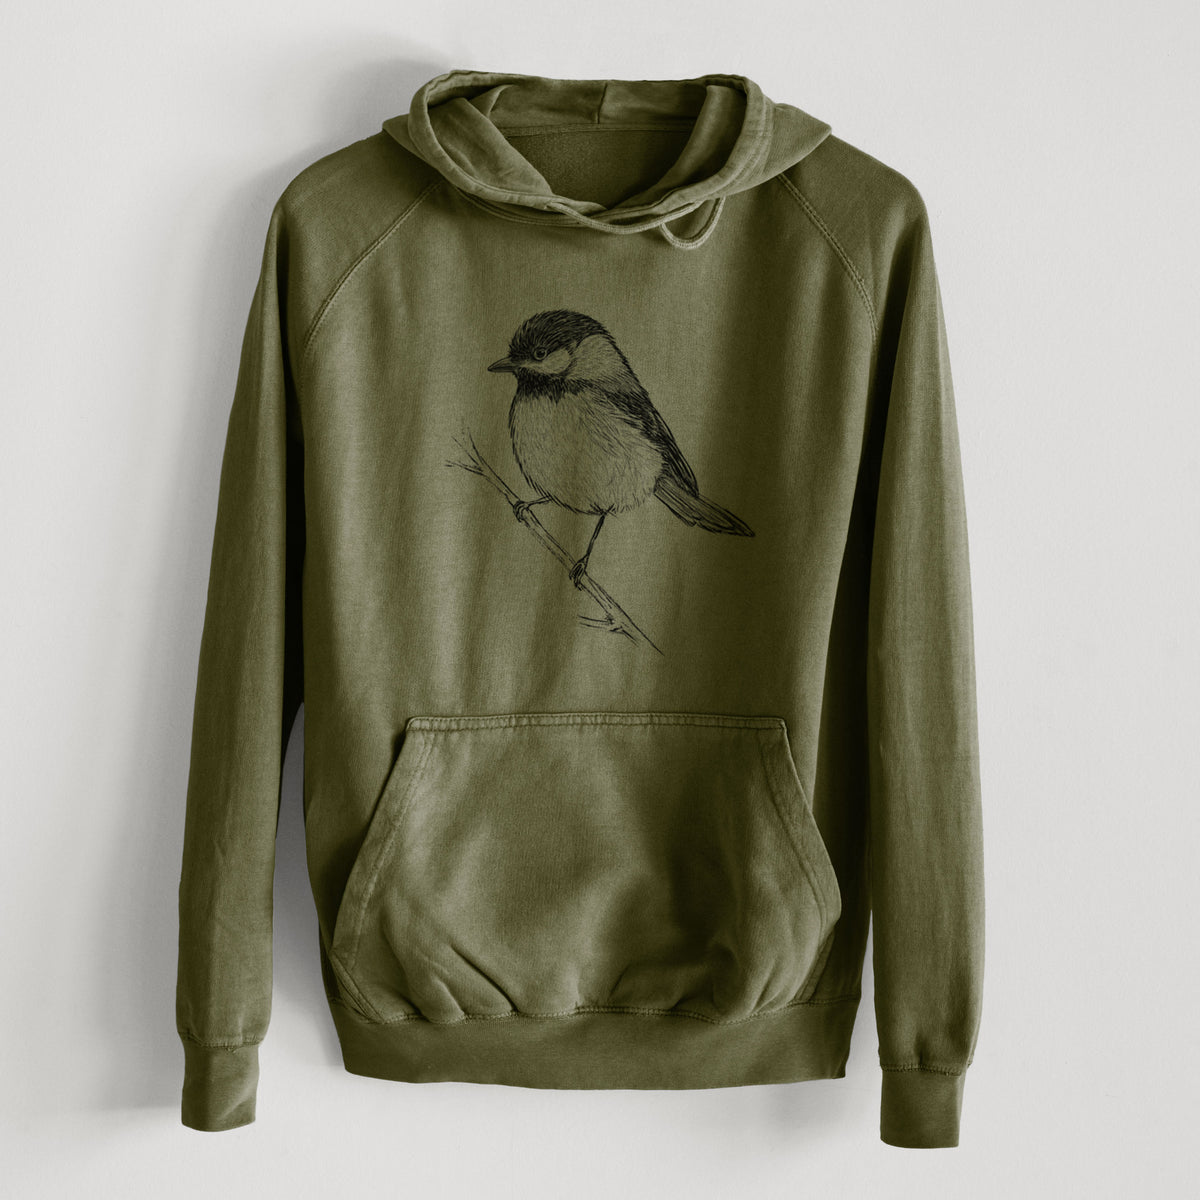 Black-capped Chickadee - Poecile atricapillus  - Mid-Weight Unisex Vintage 100% Cotton Hoodie